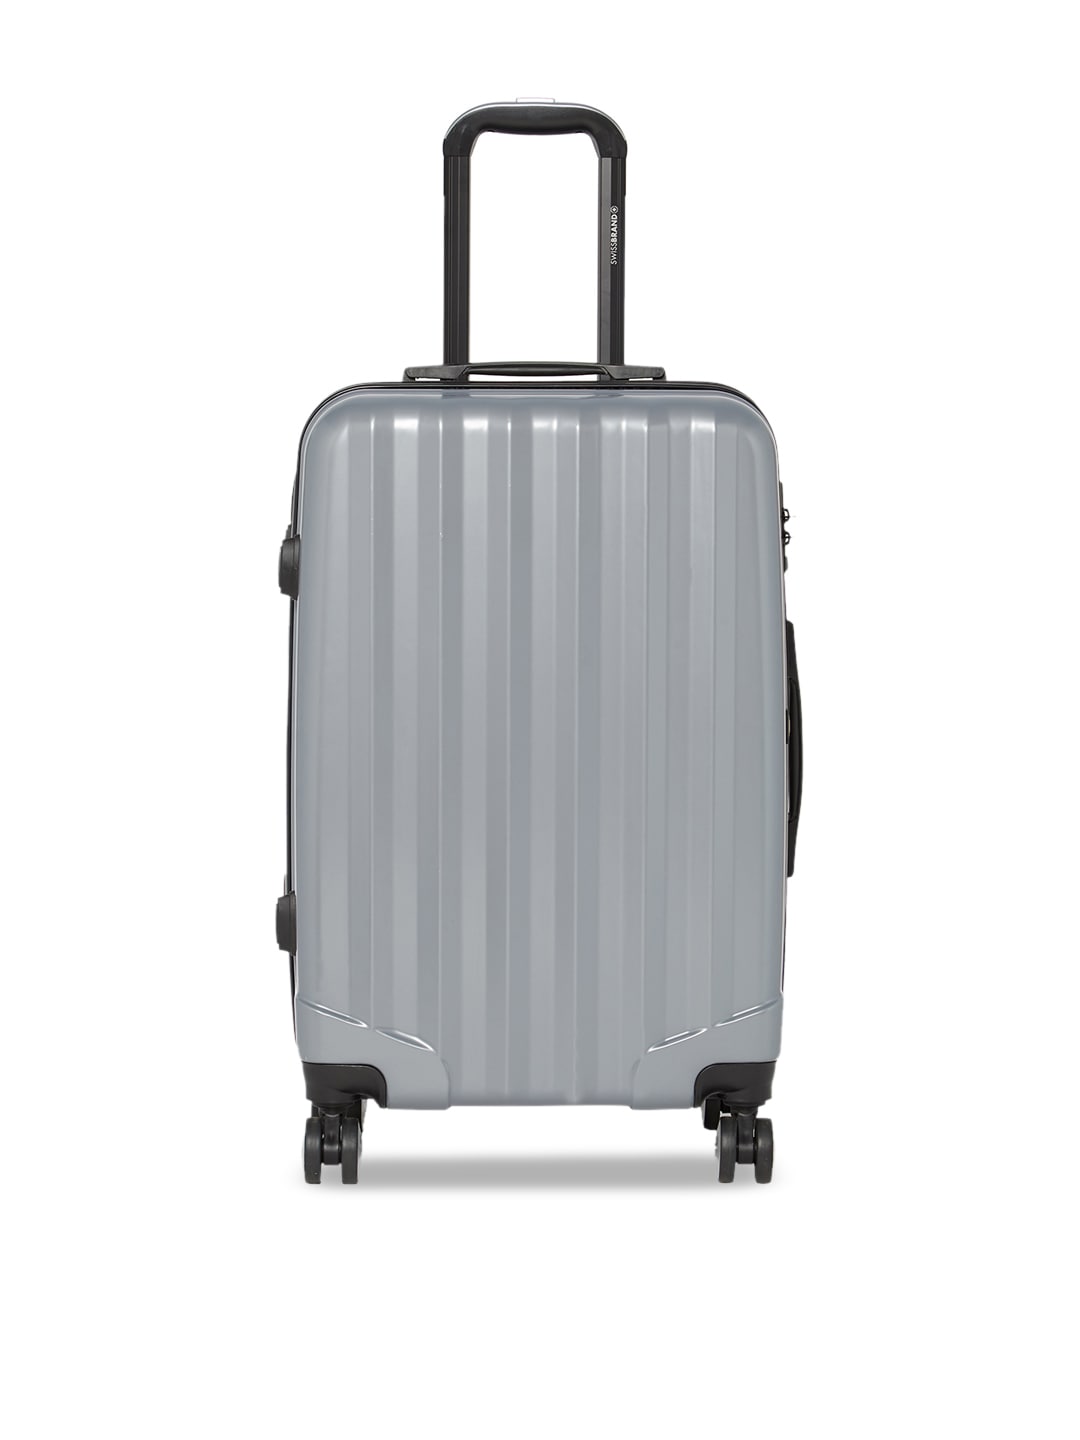 SWISS BRAND Unisex Grey Solid BADEN 360-Degree Rotation Hard-Sided Medium Trolley Suitcase Price in India